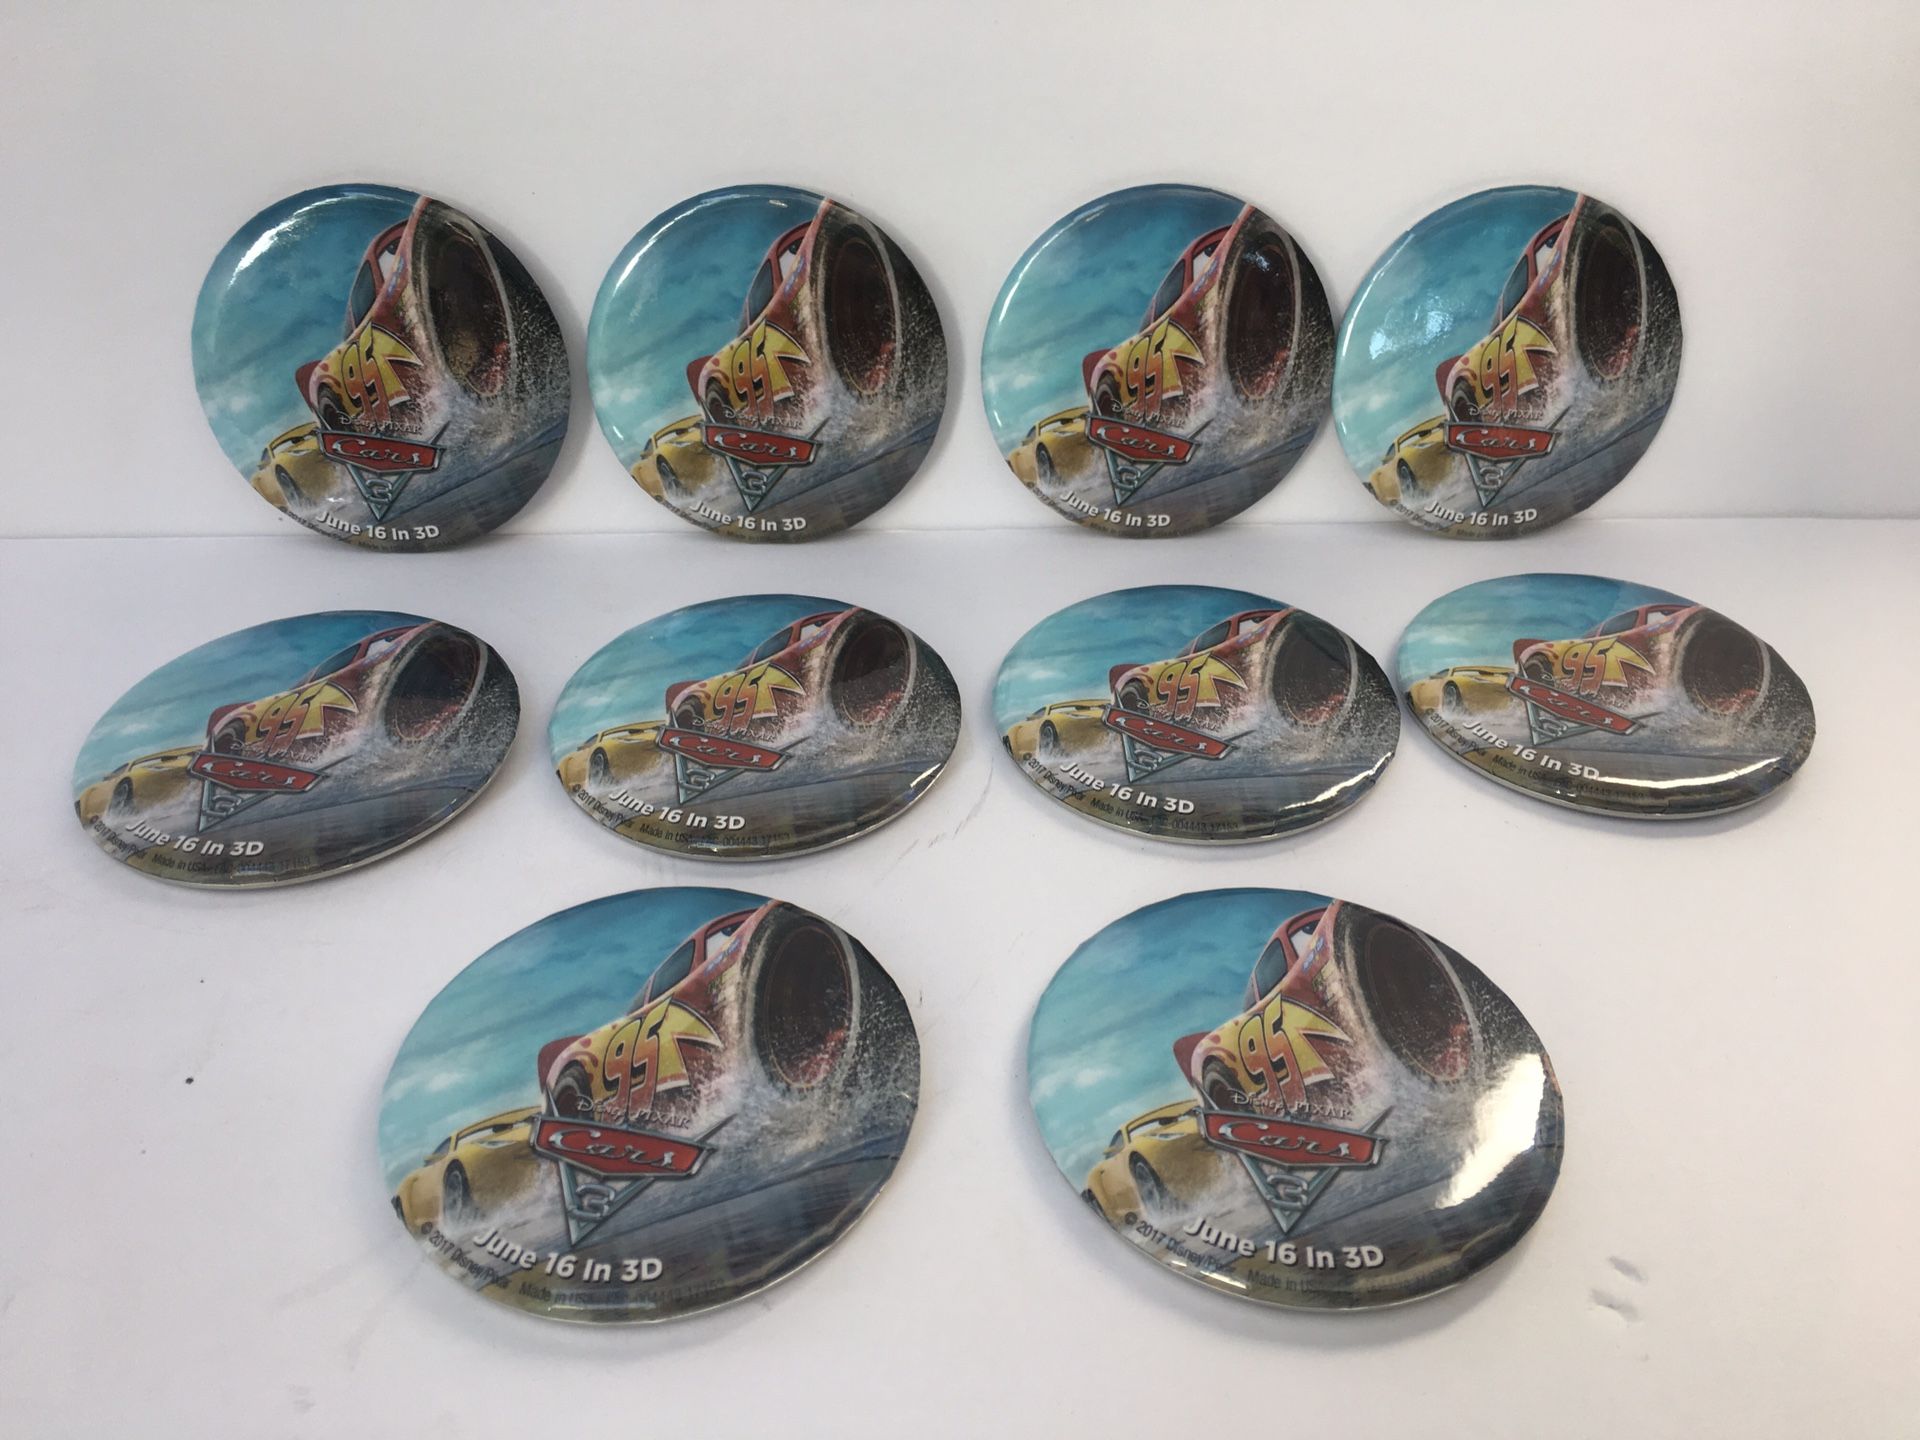 Ten New Promo Disney Promo Pins for Cars 3 * Never Used